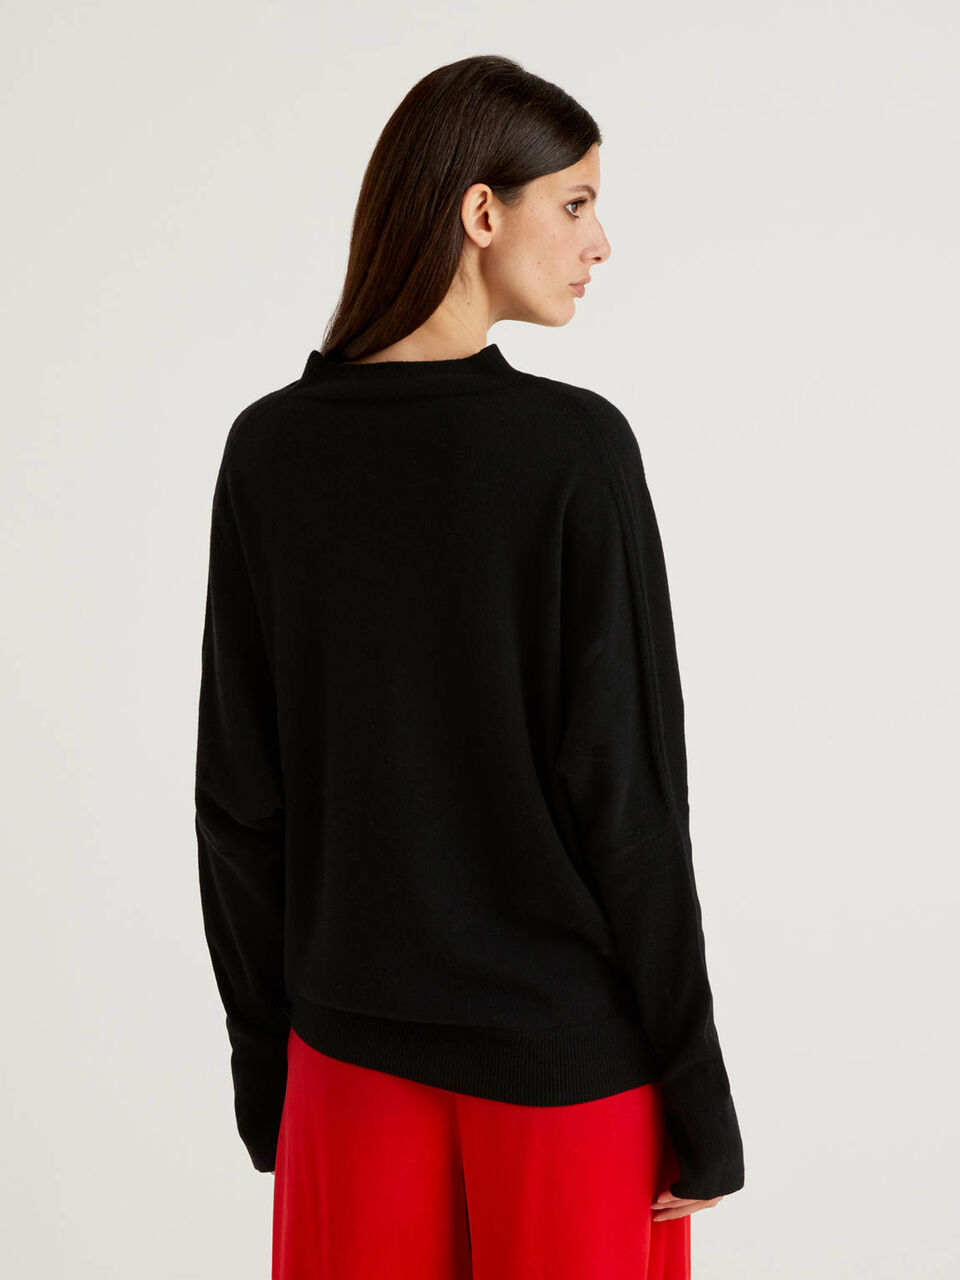 Black turtleneck with ribbed sleeves